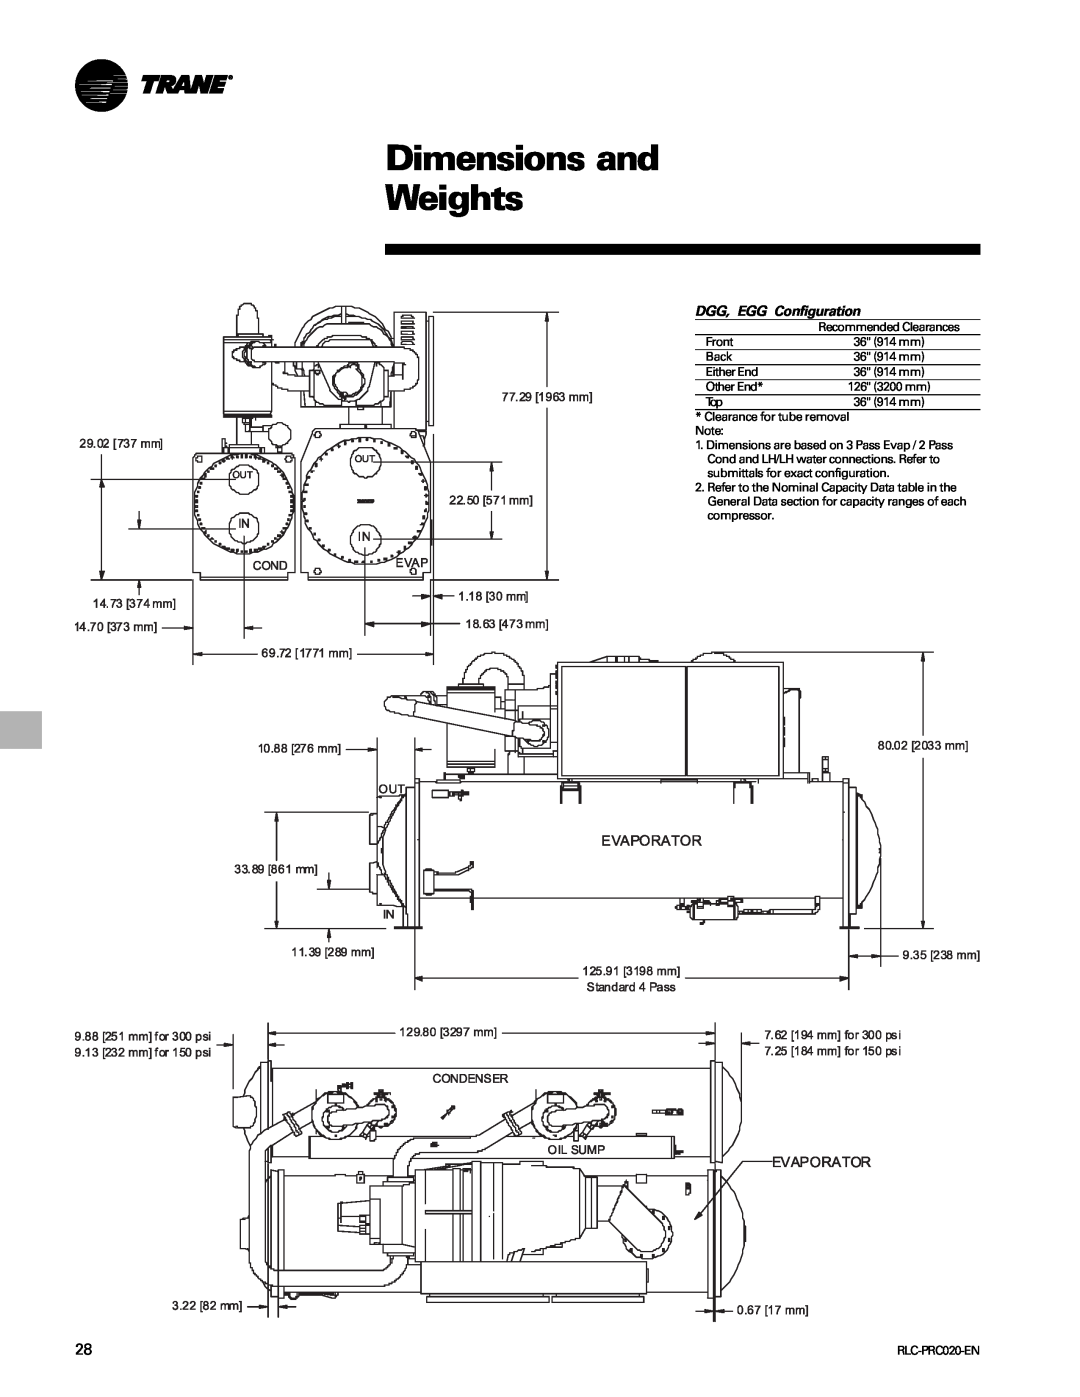 Trane RTHD manual Dimensions and Weights, DGG, EGG Configuration 